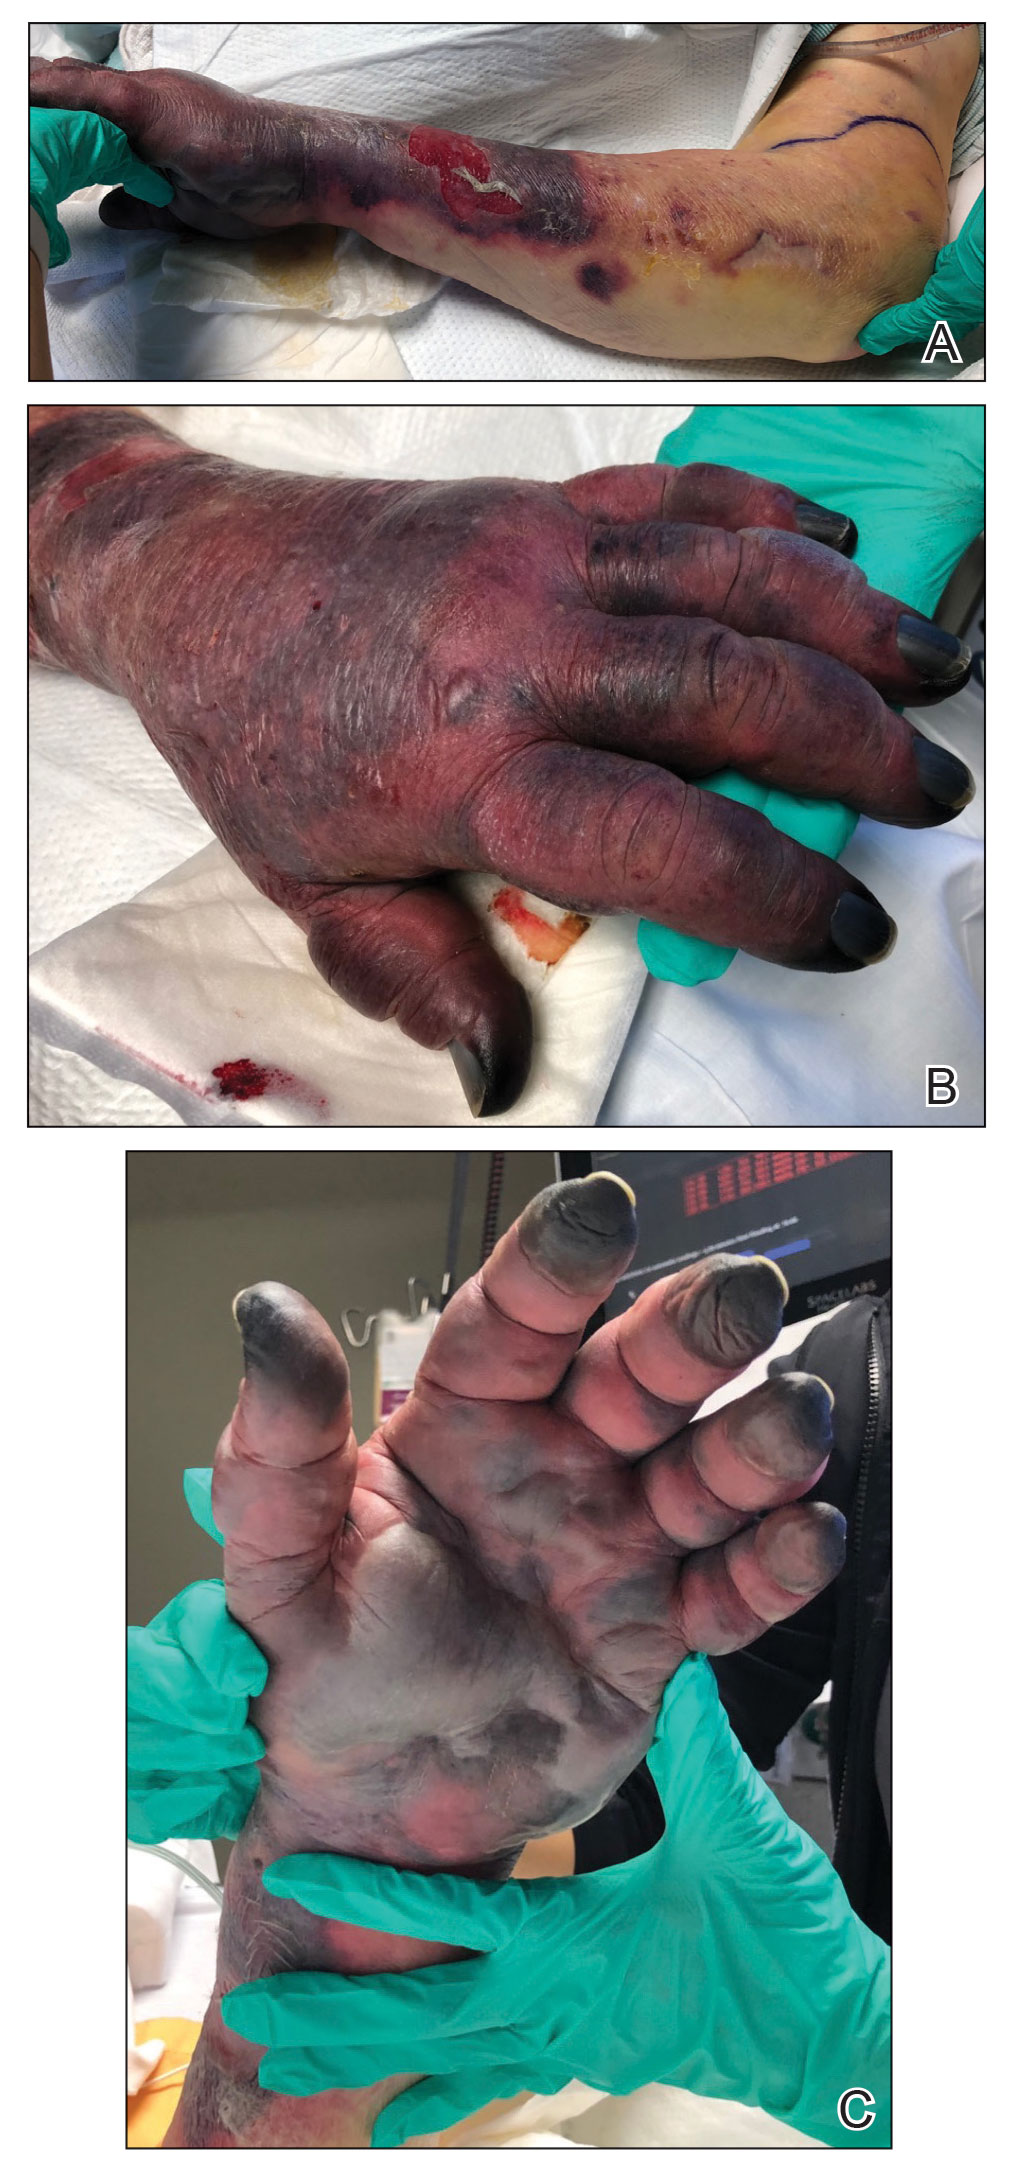 A, Resolution of erythema on the left proximal forearm to the elbow after the first administration of hyaluronidase. B, Left dorsal aspect of the hand. C, Persistence of dusky violaceous patches and necrotic bullae on the left palm. 